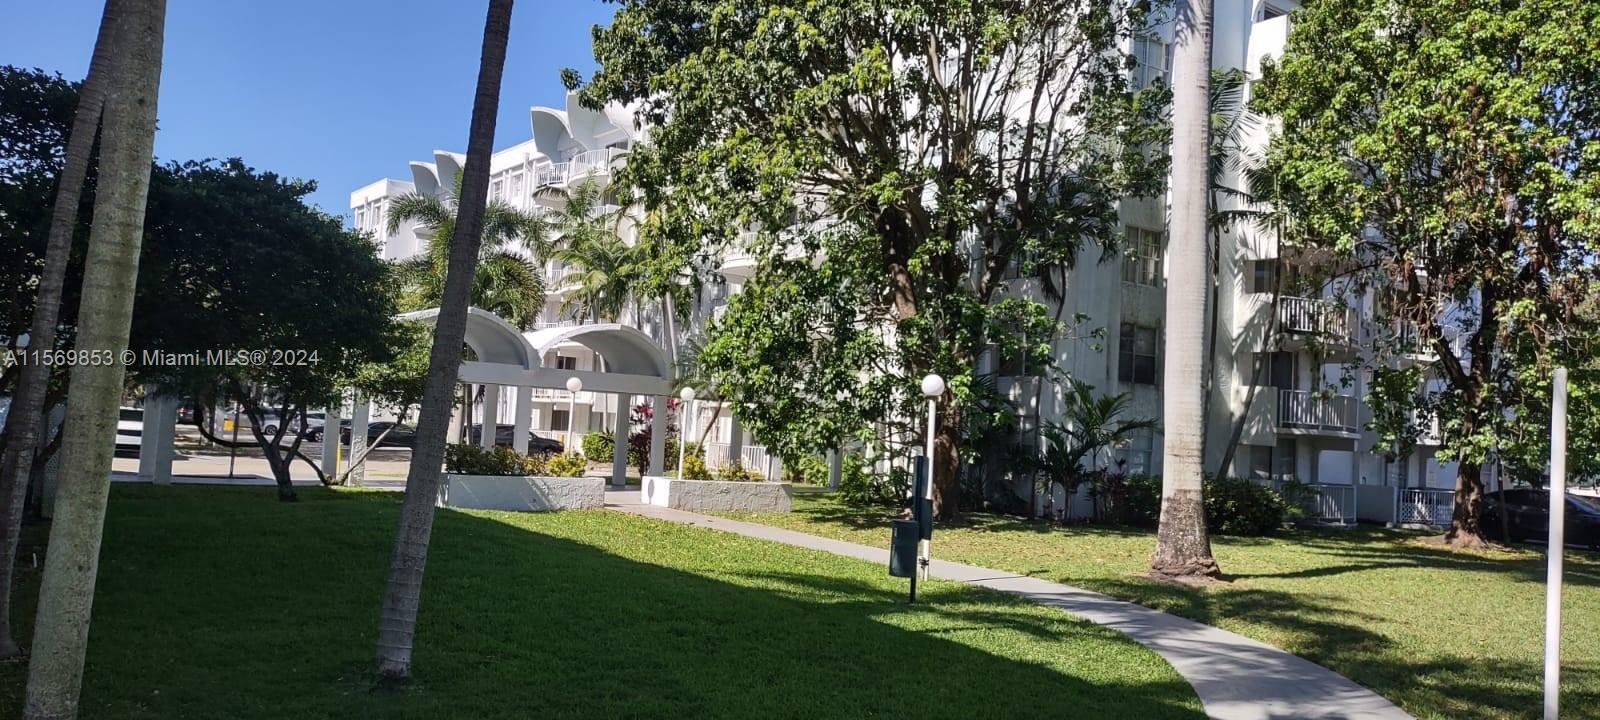 488 NW 165th Street Rd B611, Miami, Florida 33169, 1 Bedroom Bedrooms, ,1 BathroomBathrooms,Residentiallease,For Rent,488 NW 165th Street Rd B611,A11569853